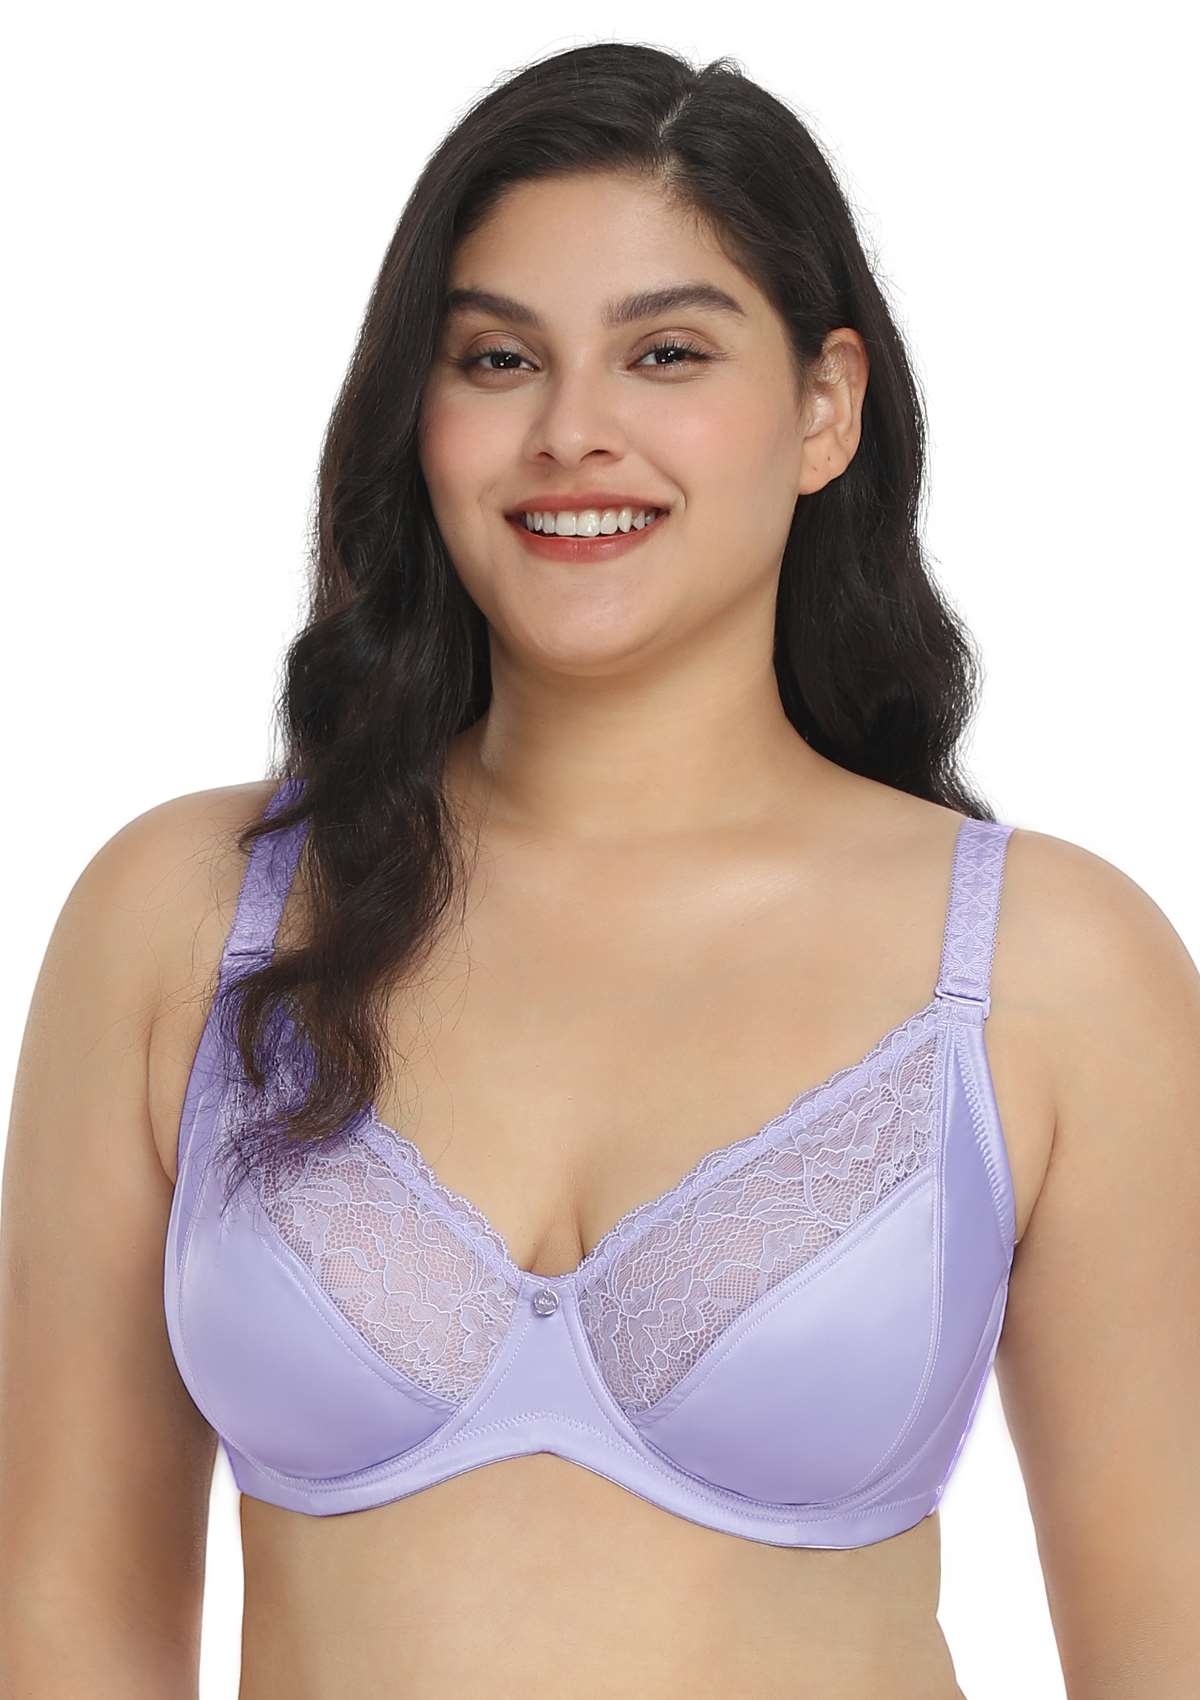 HSIA Foxy Satin Silky Full Coverage Underwire Bra With Floral Lace Trim - Purple / 34 / D